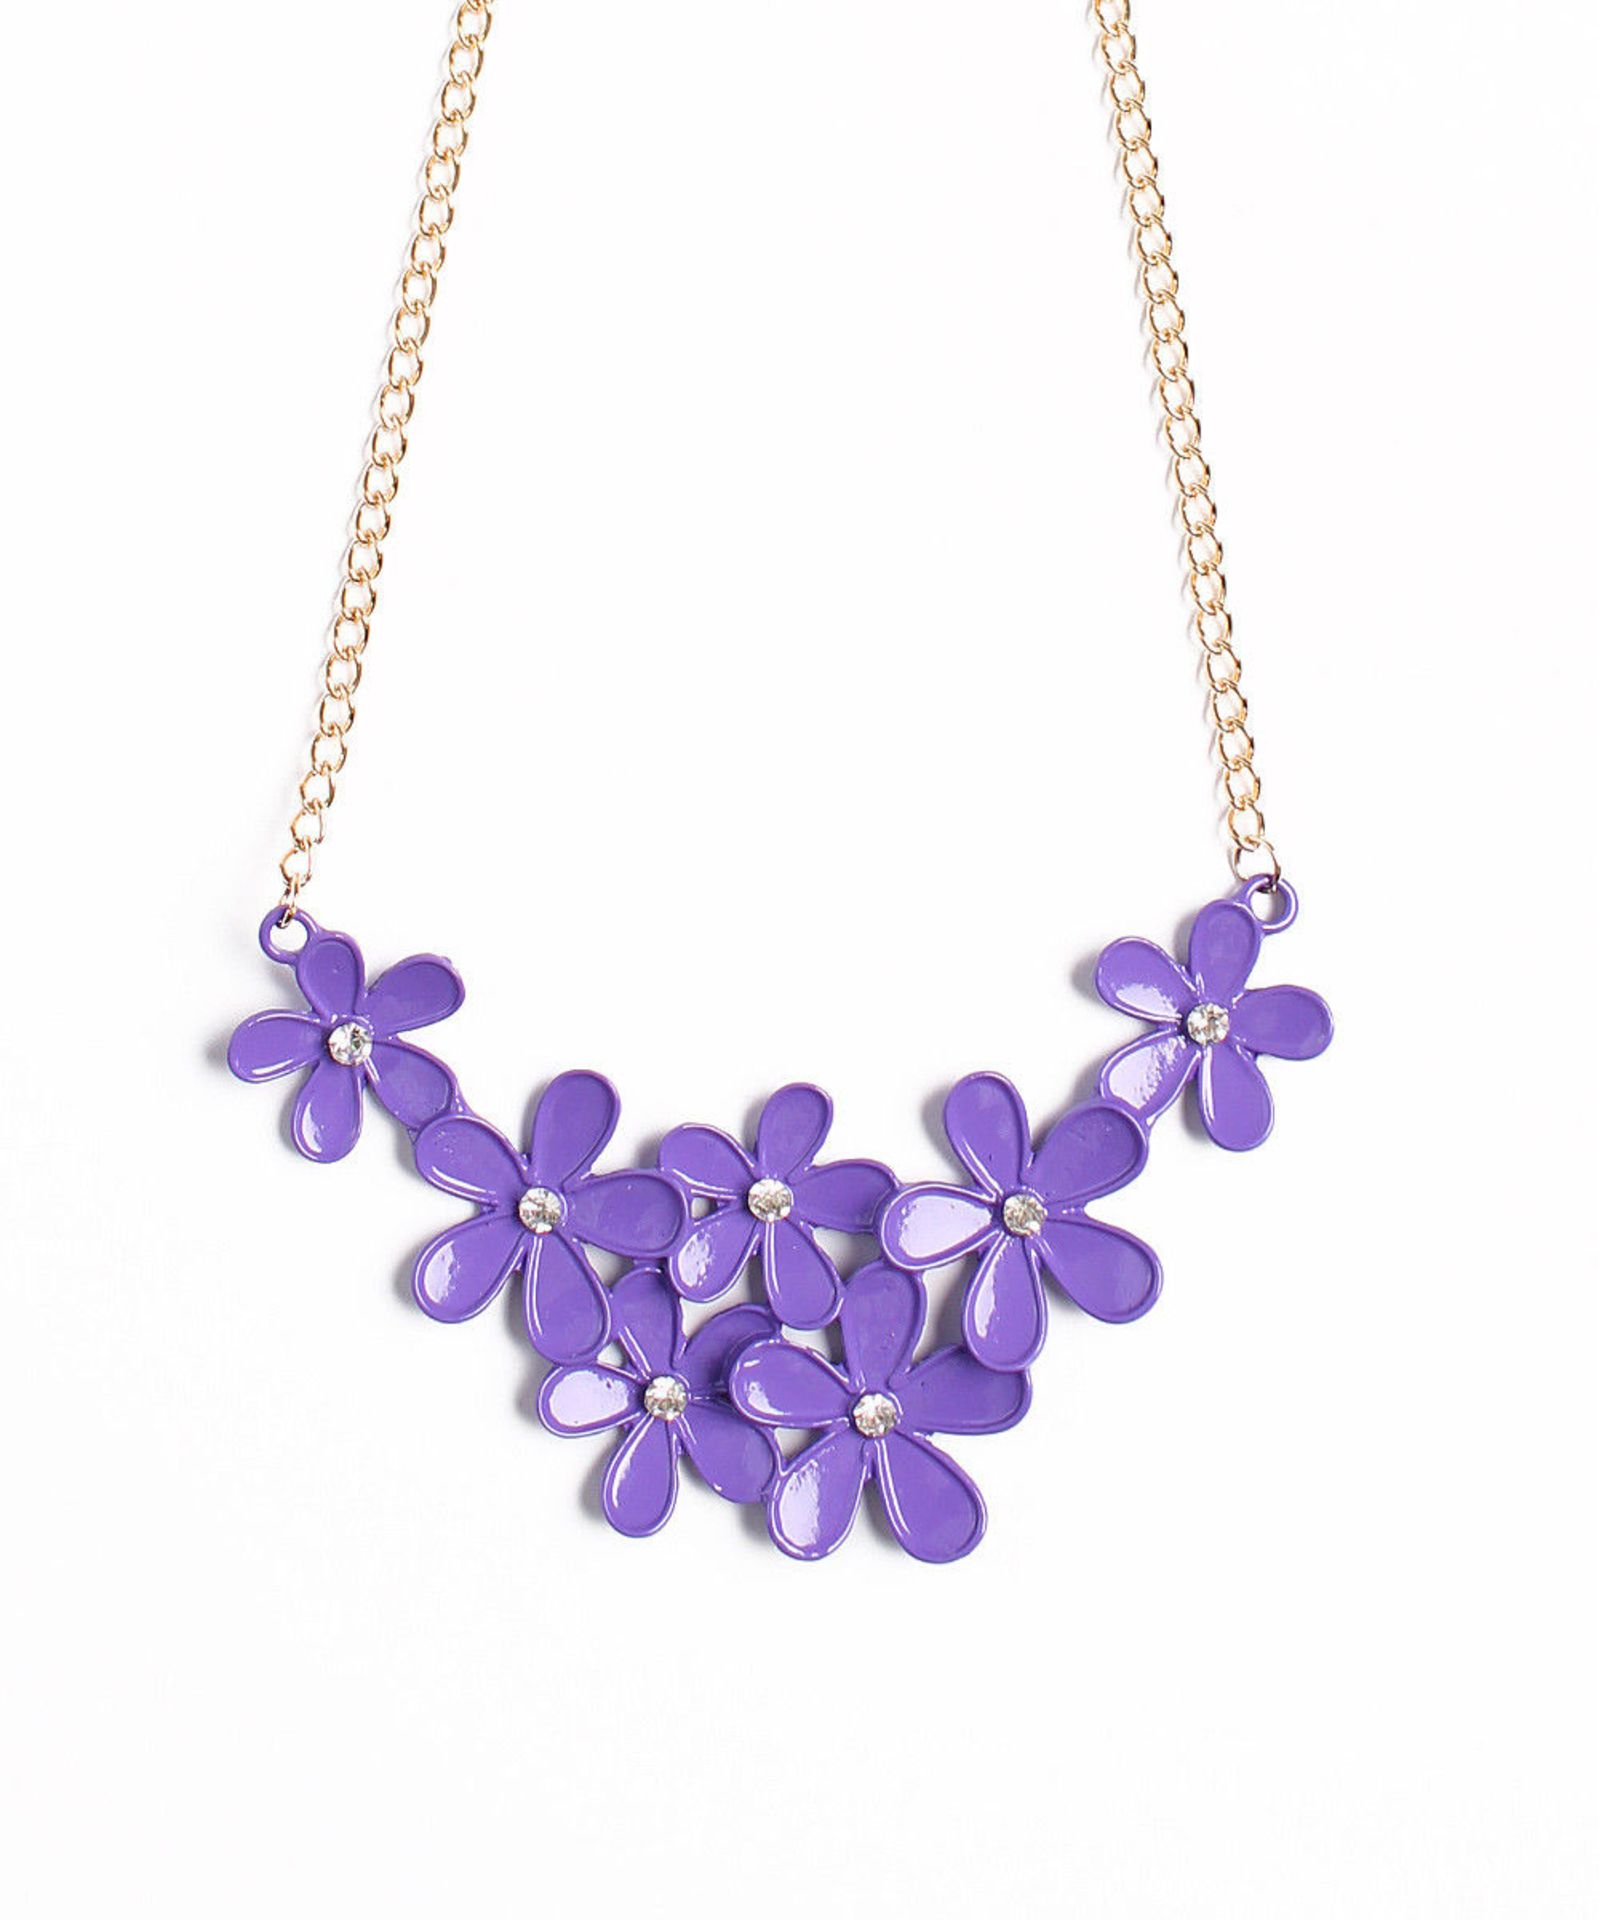 Riah Fashion Purple Flower Statement Necklace (New with tags) [Ref: 38251066- T-82]